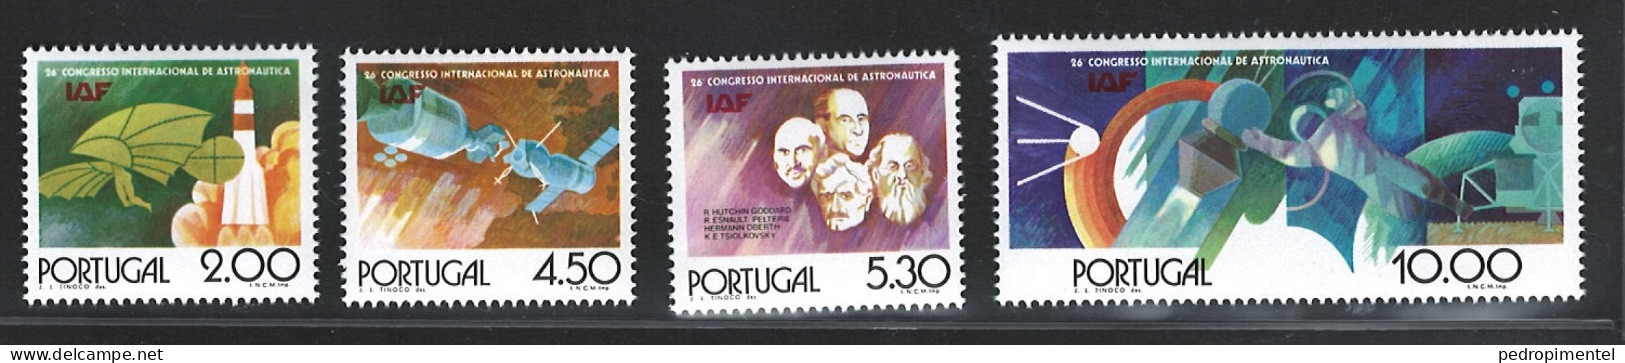 Portugal Stamps 1975 "International Astronautical Federation" Condition MNH #1261-1264 - Nuevos